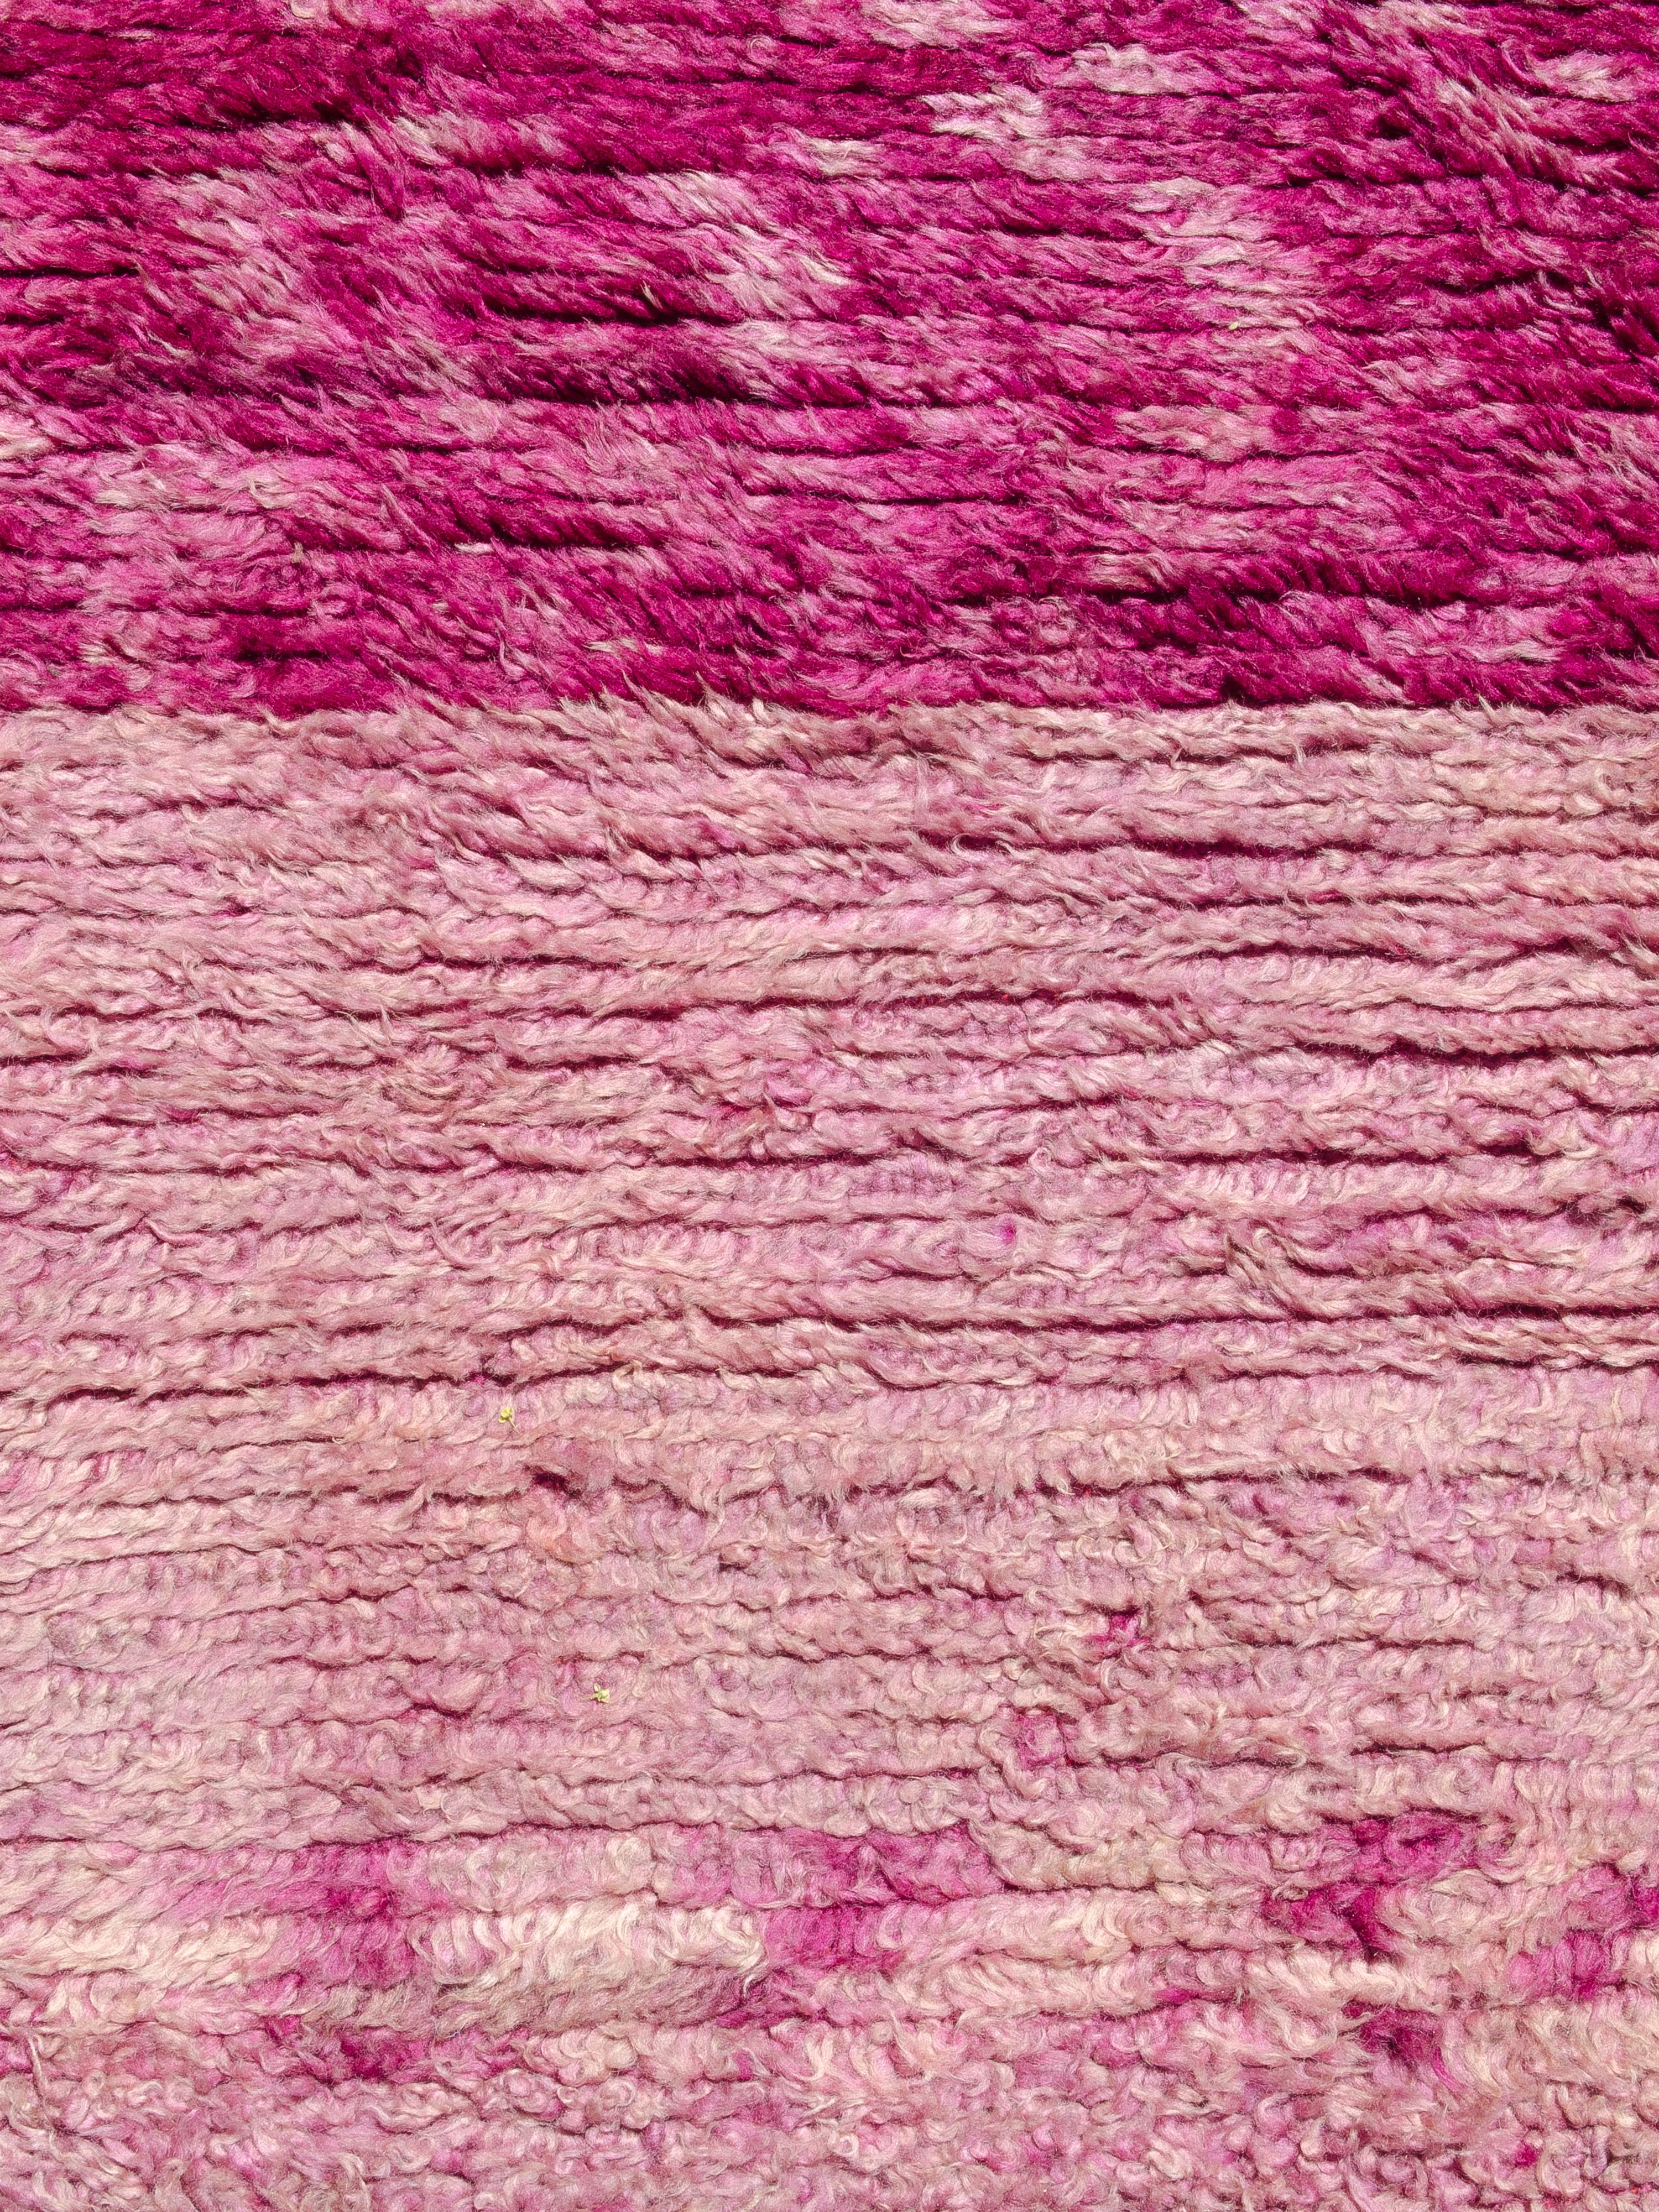 This minimal yet striking vintage Beni M'Guild carpet exhibits a field of color devoid of motifs. Knotted in an abrashed magenta and rose, with a shift in color saturation near the top of the piece. 100% wool with a beautiful patina and hand.

The